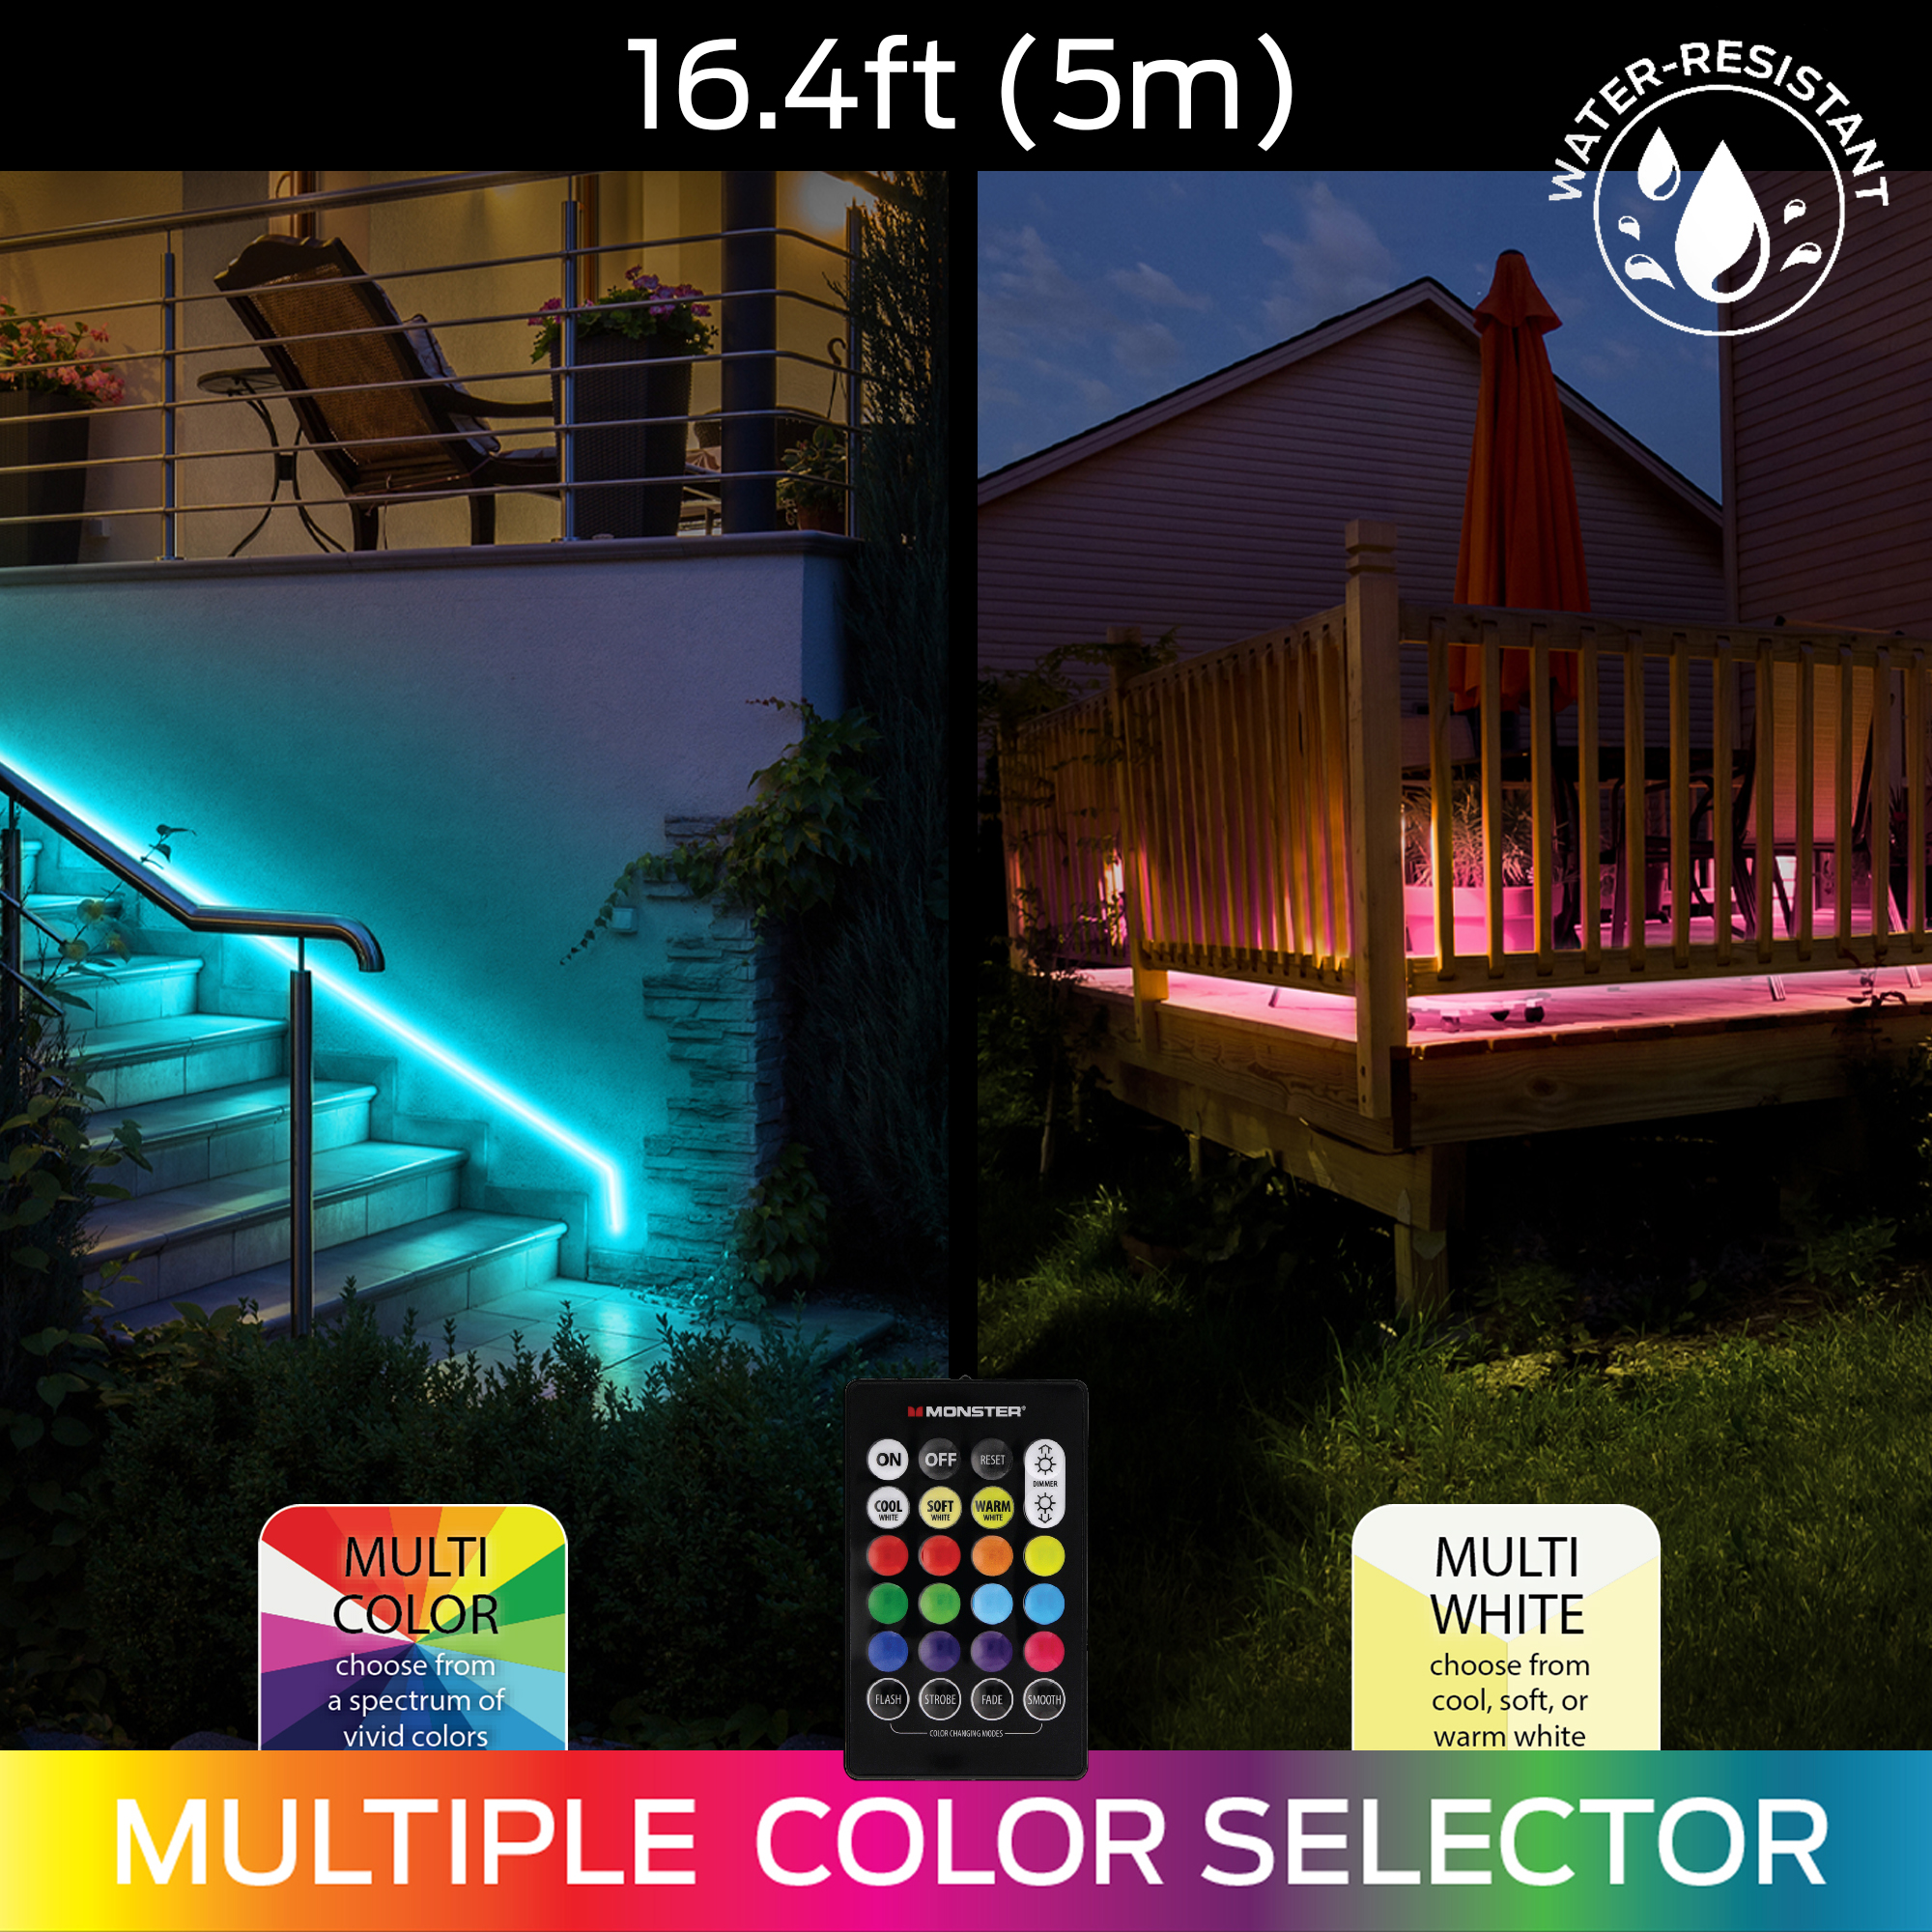 Indoor and Outdoor 16.4 ft Multi-Color Multi-White LED Light Strip, Remote Control - Monster Illuminessence